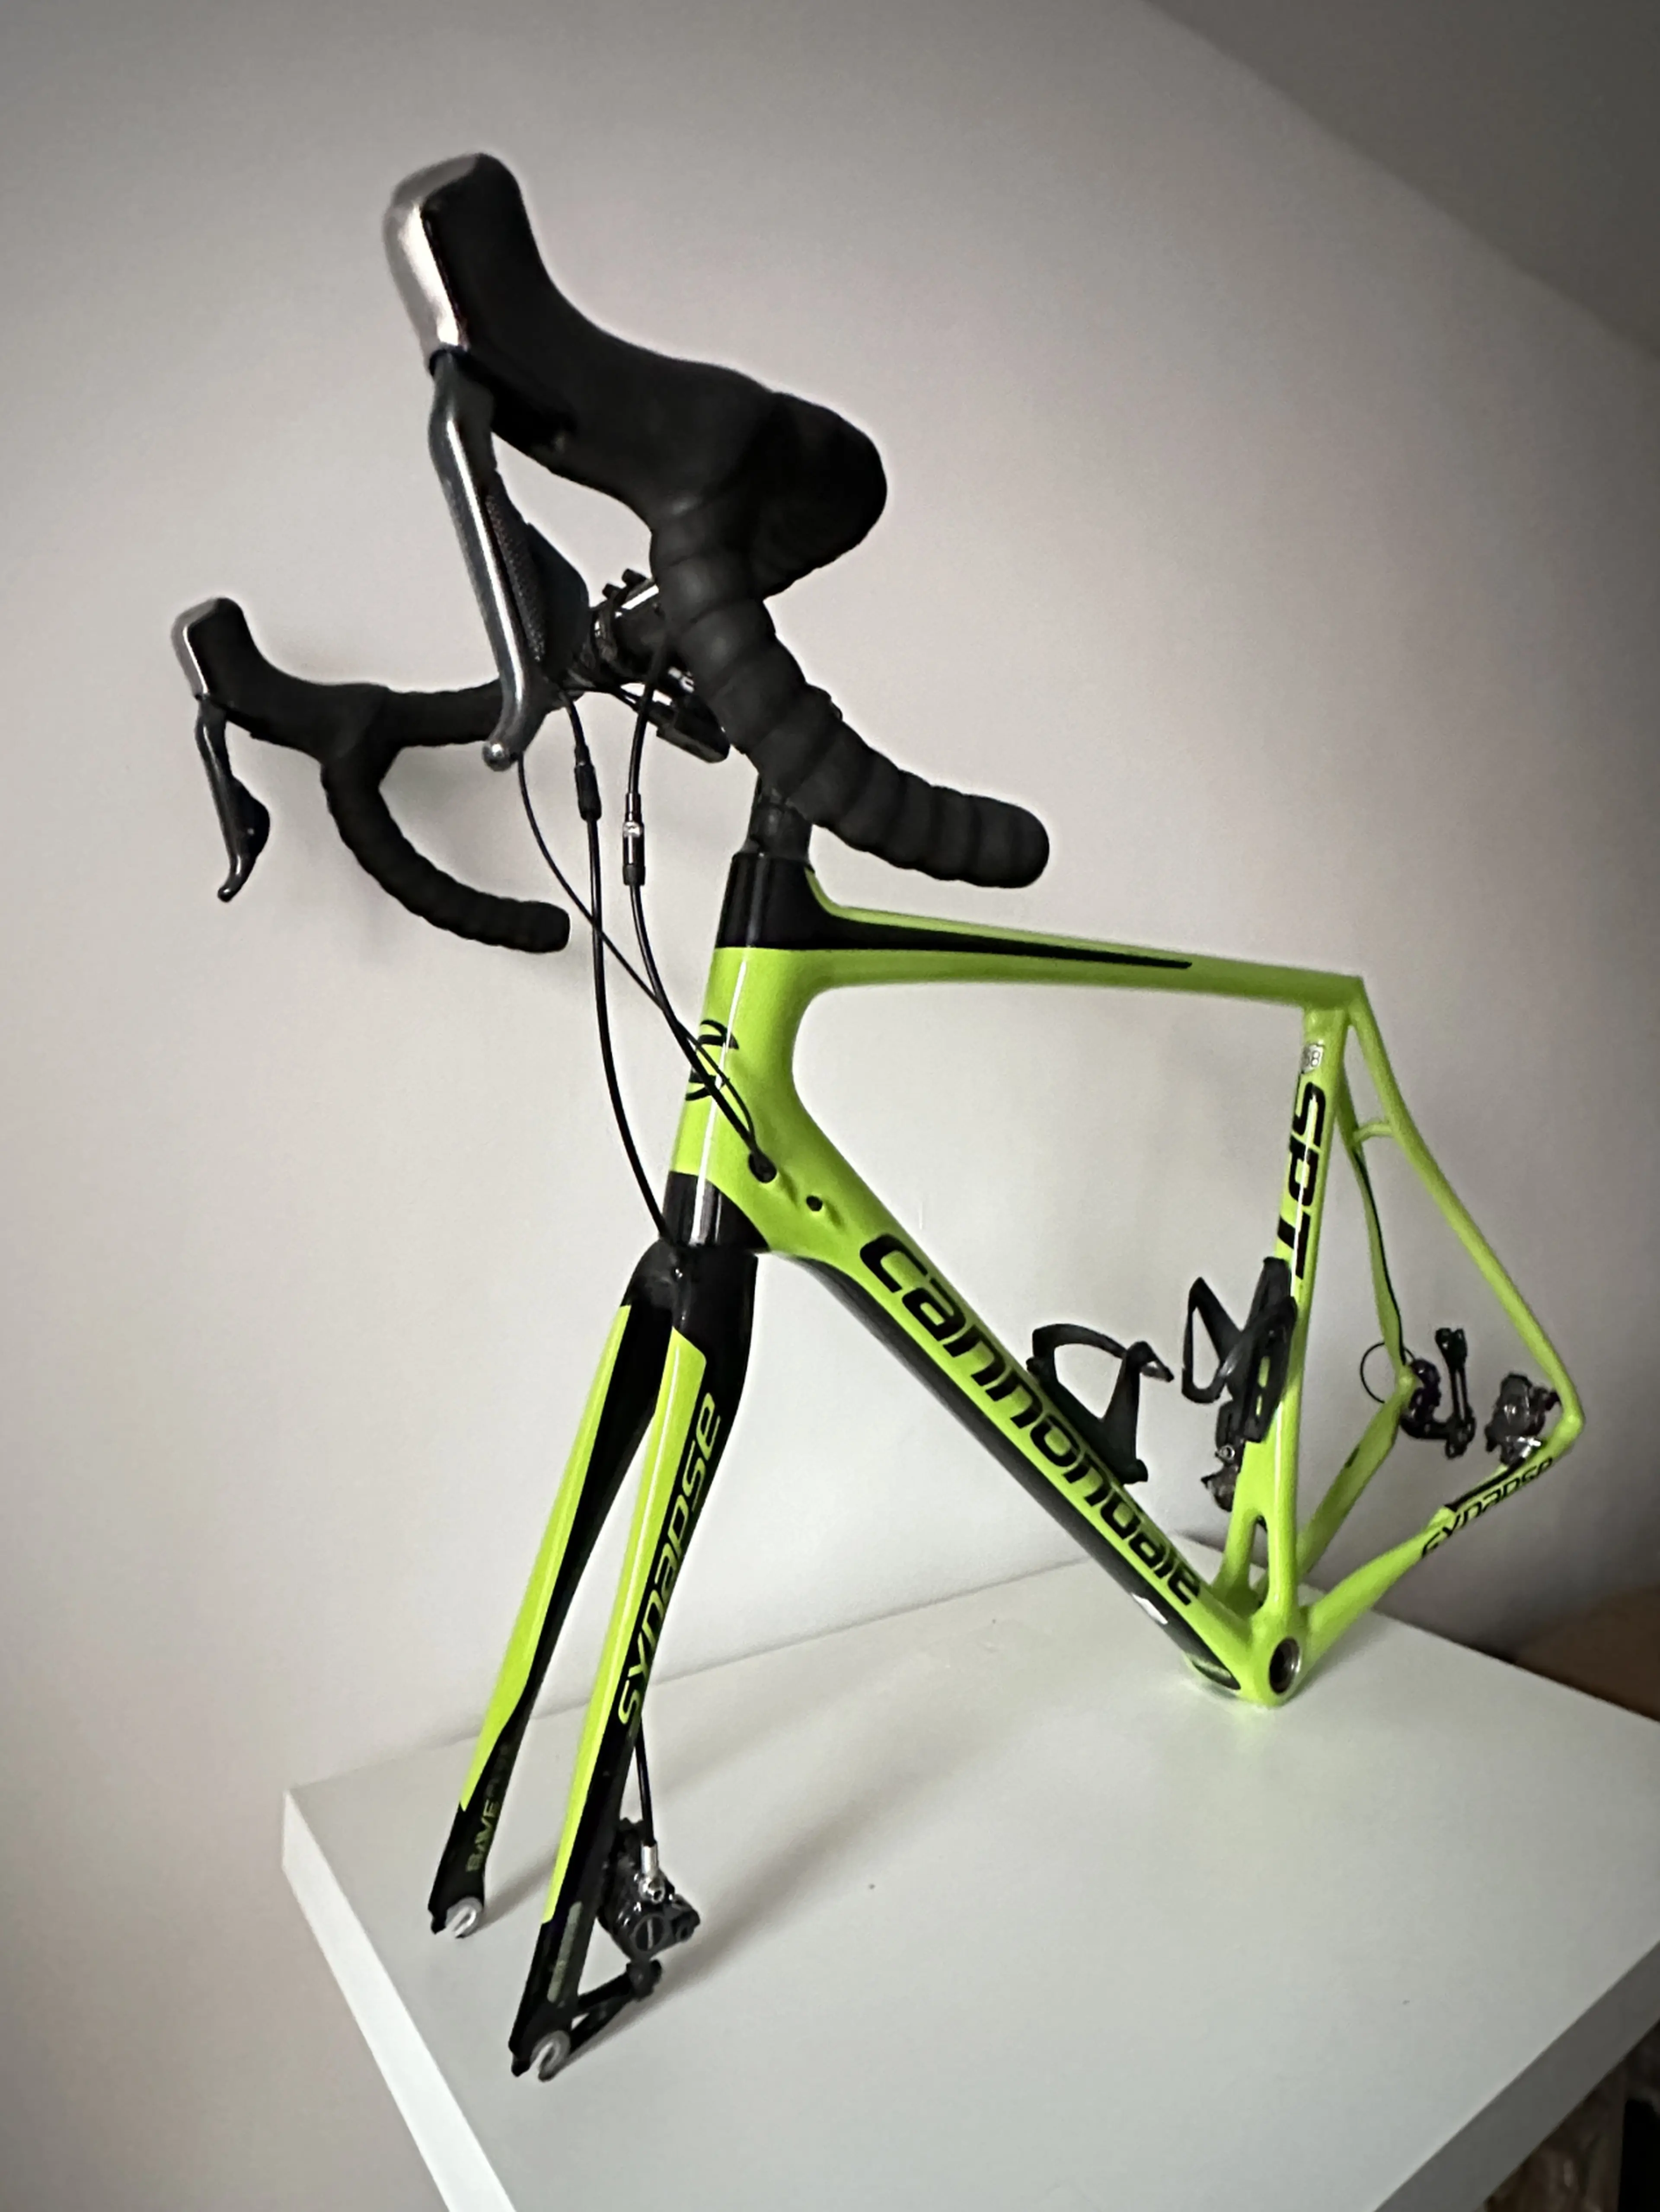 3. Cannondale Synapse Disc + Ultregra Di2 groupset